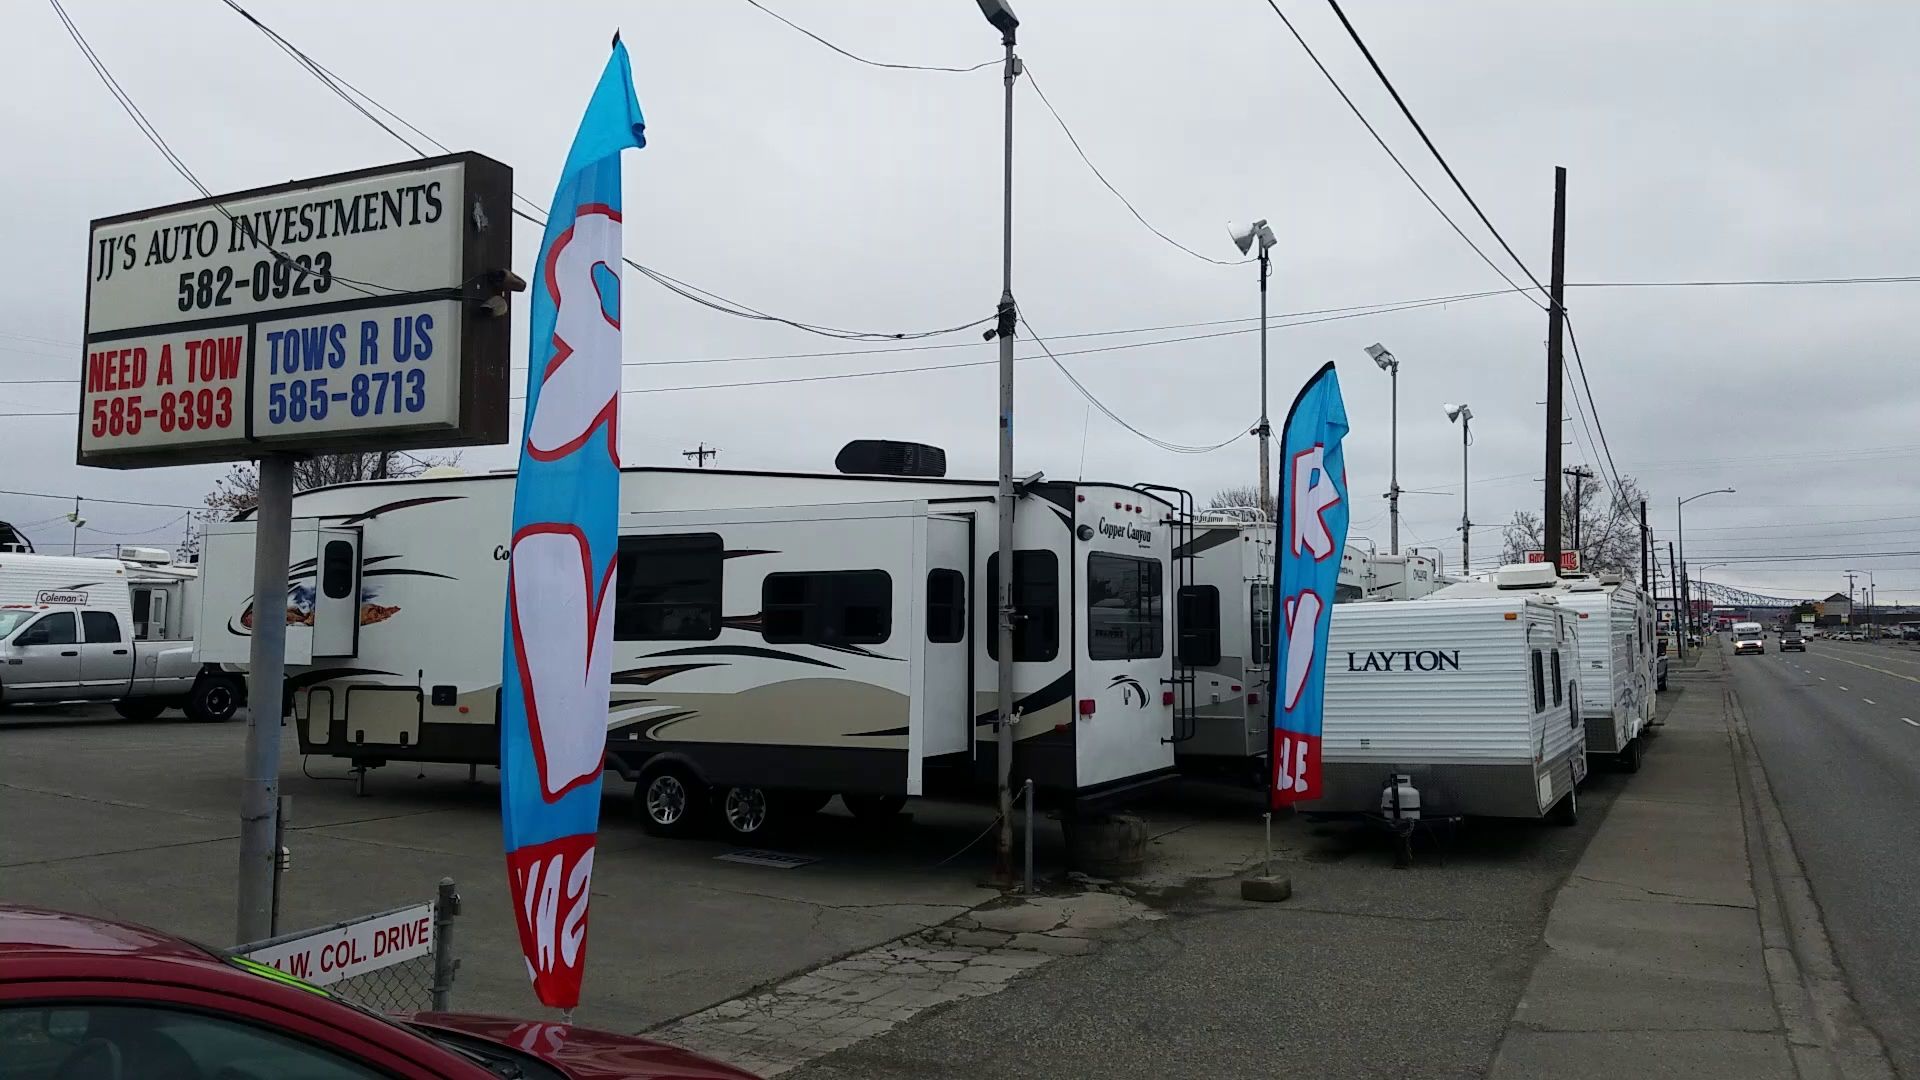 Services & Products JJ's Auto Investments & RVs in Kennewick WA